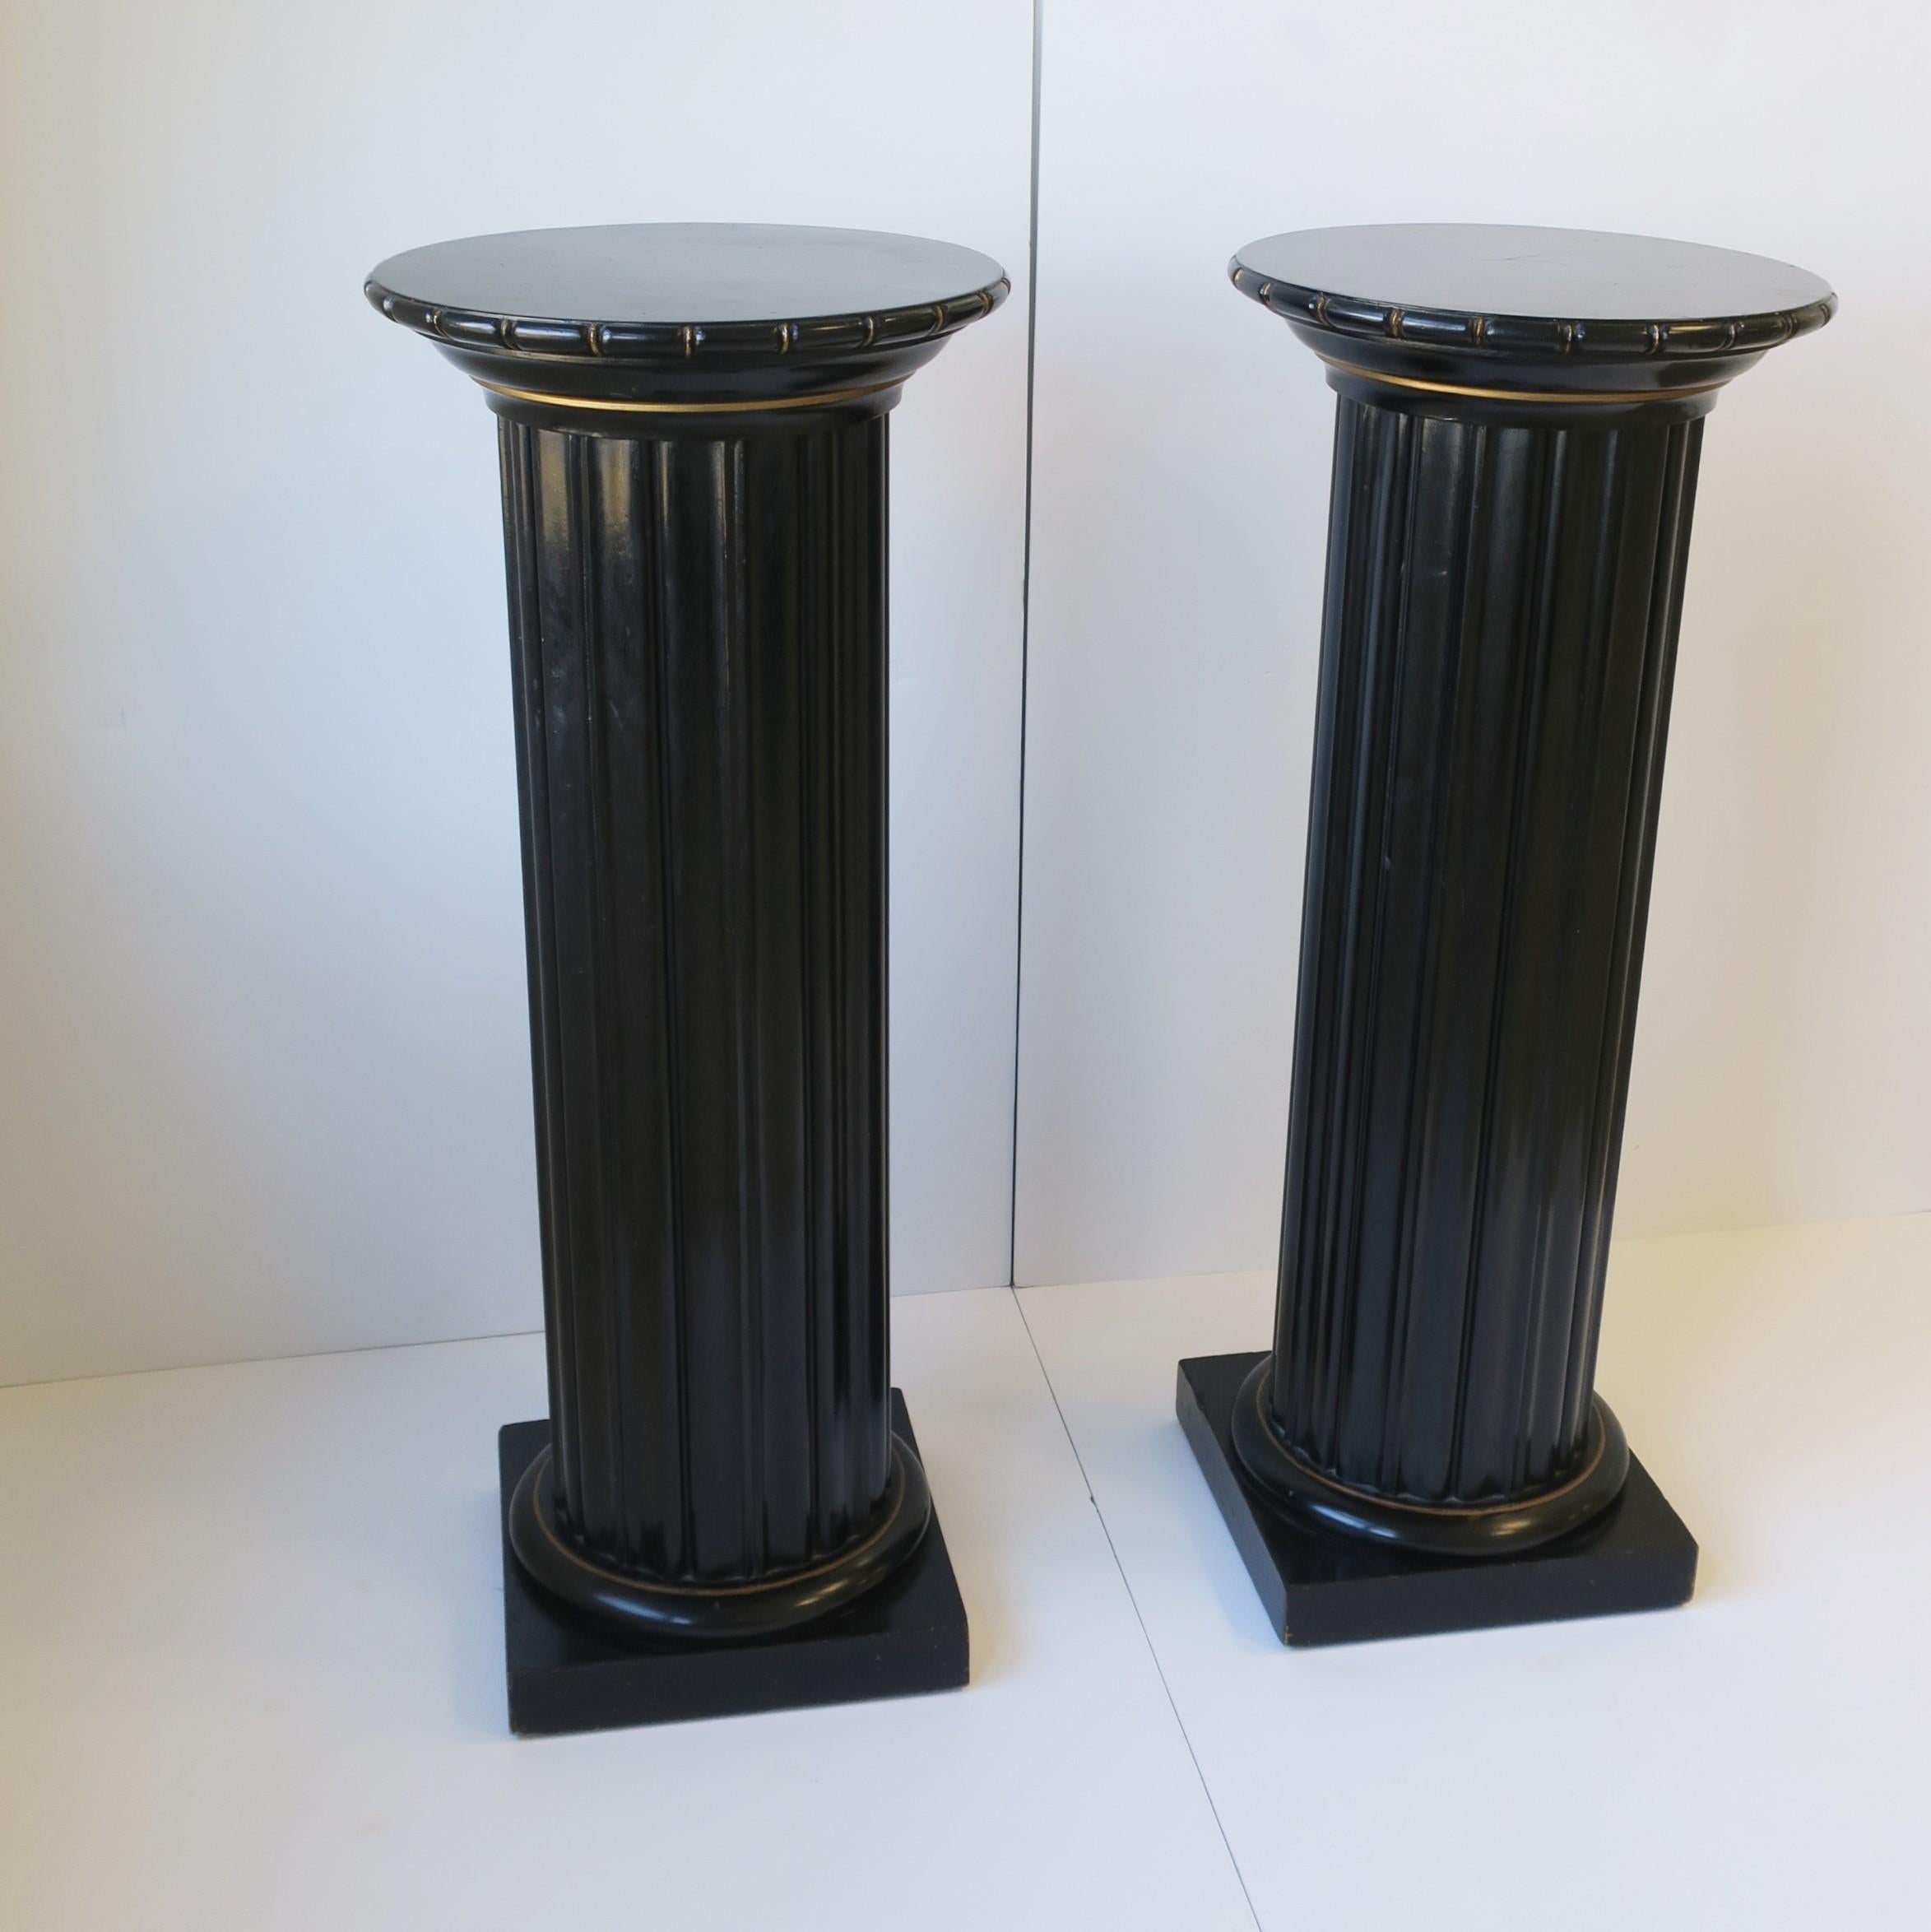 Black Lacquer Wood Pillar Column Pedestal Stand in the Neoclassical Design 4